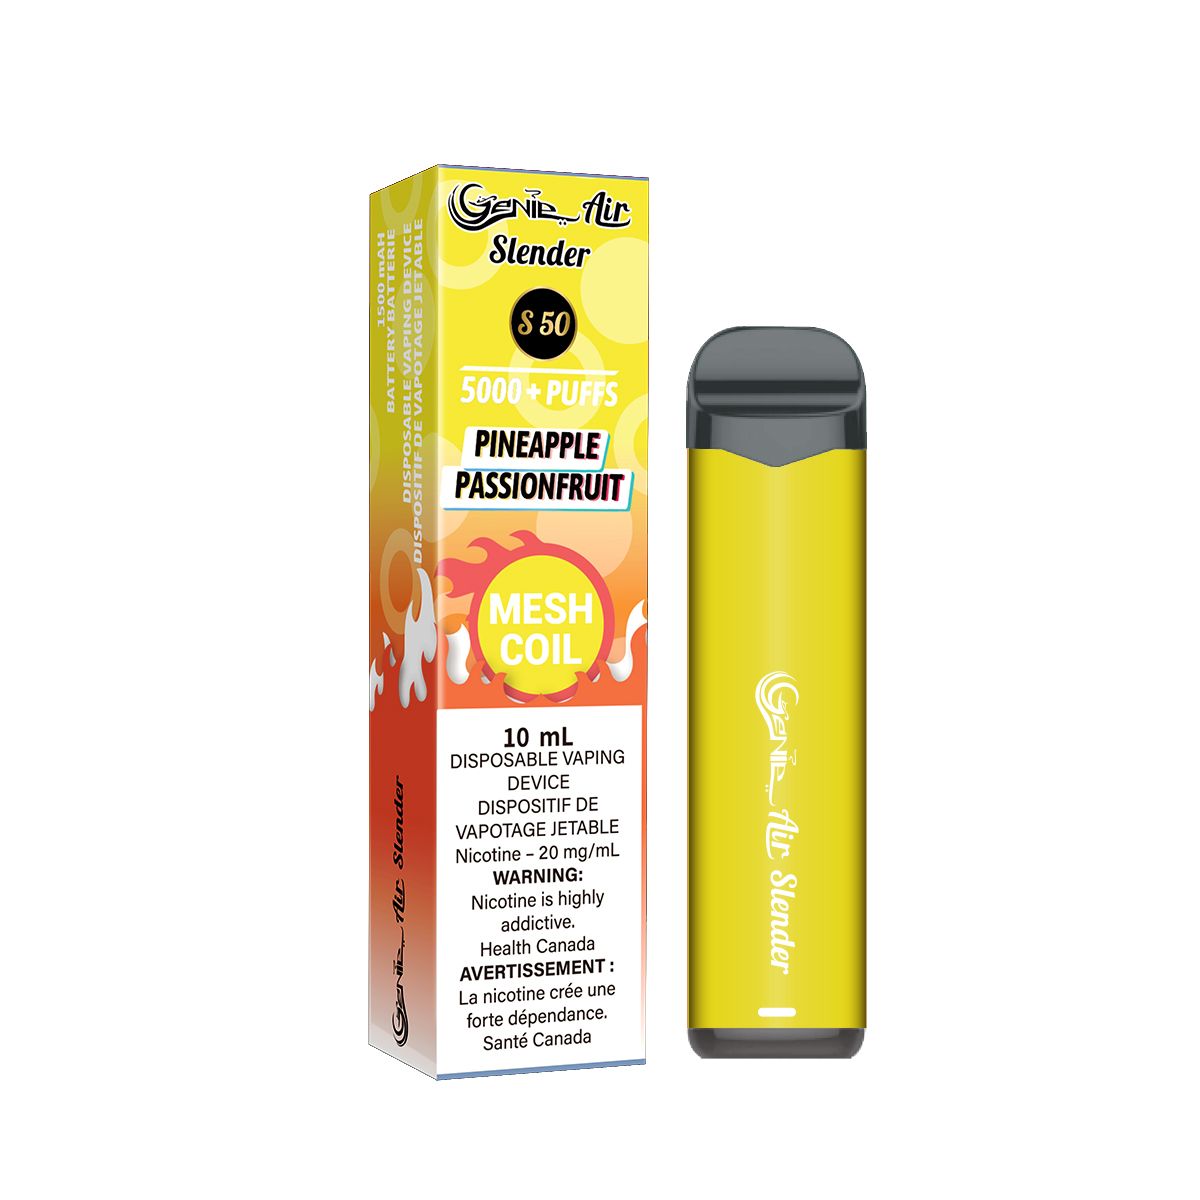 Genie slender 5000 Puffs per 1 disposable device  Fully charged  2% Salt Nicotine  Battery: 1500 mAh  Mesh Coil Technology s50 pineapple passionfruit